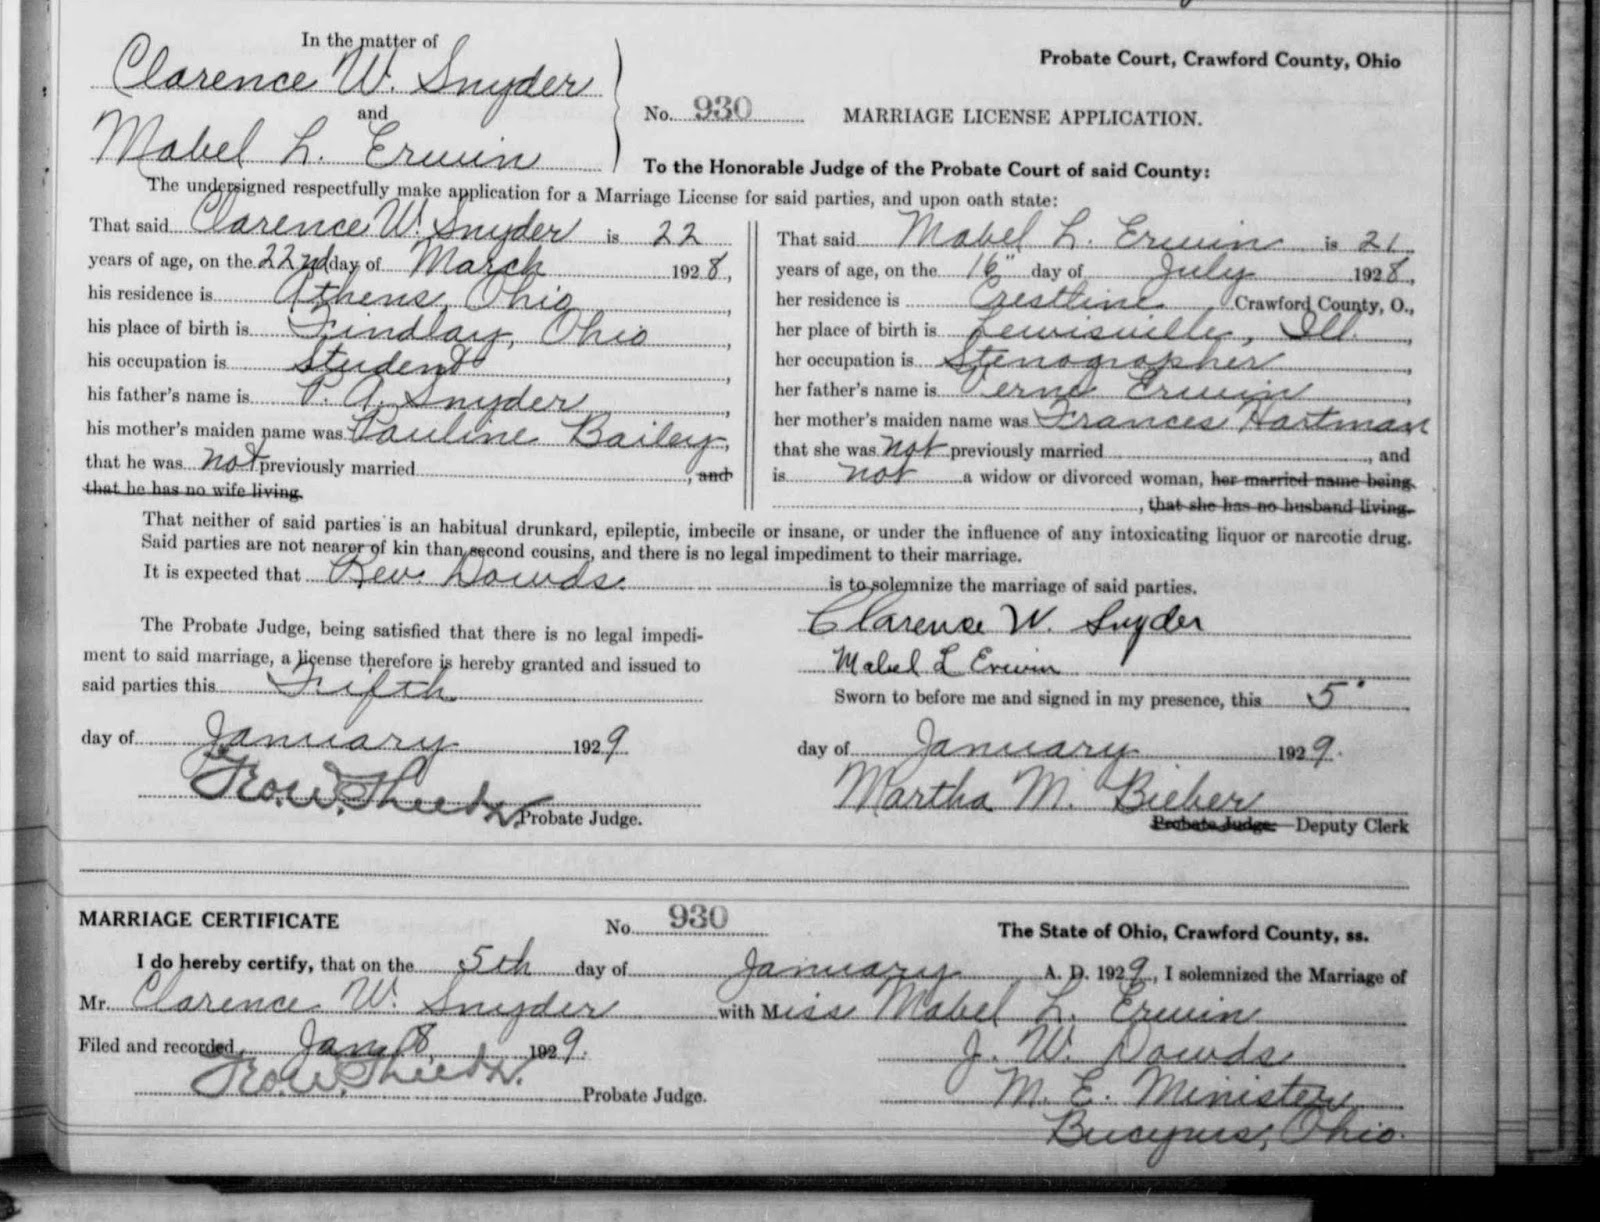 Climbing My Family Tree: Snyder-Erwin Marriage License Application and Certificate